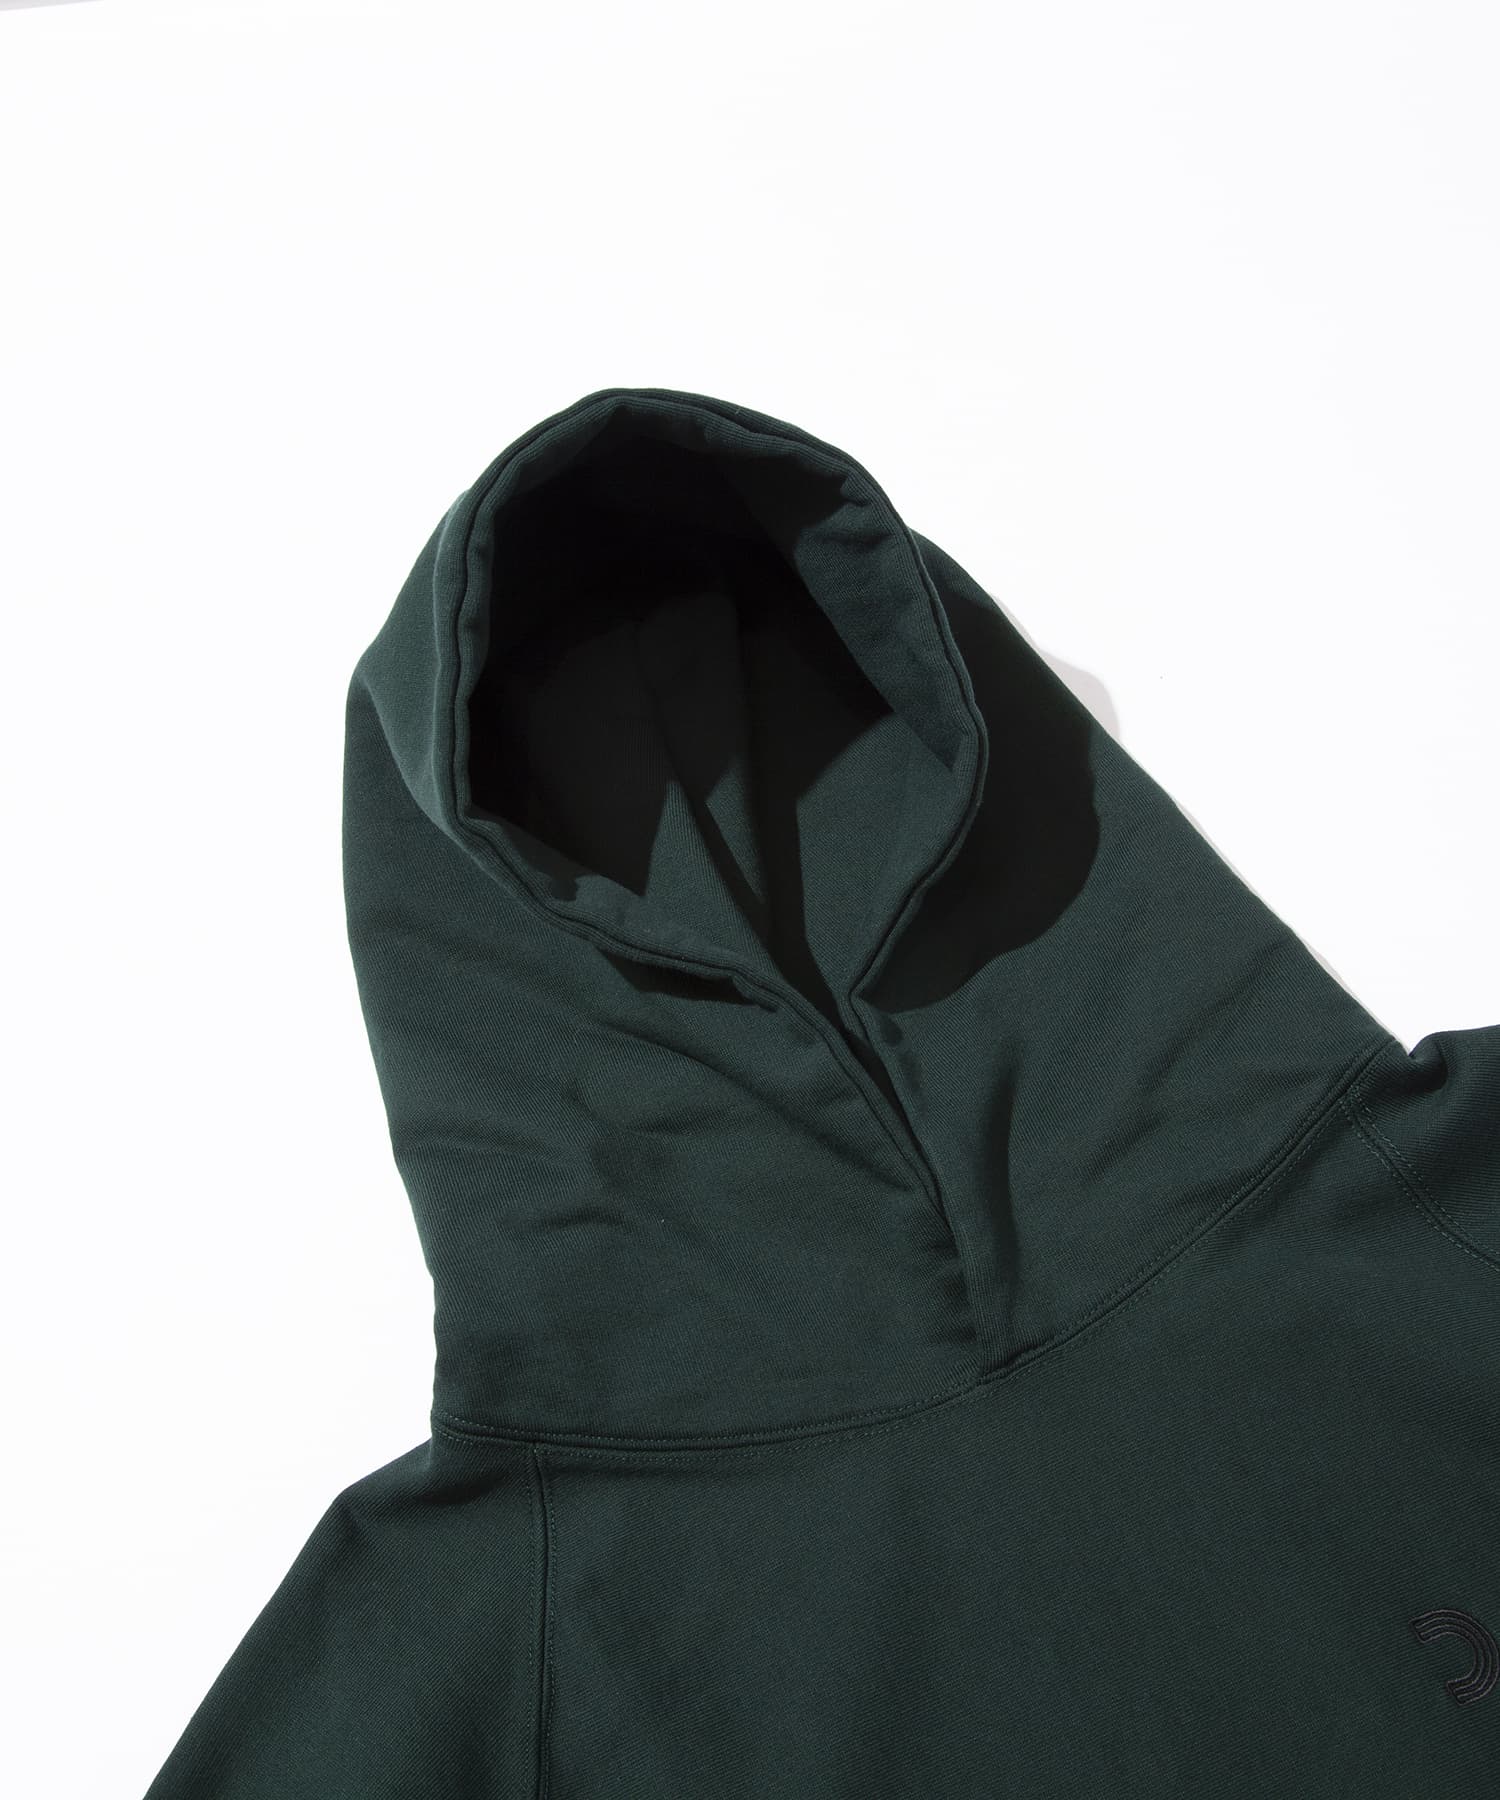 HALF TRACK PRODUCTS parka / ハーフトラックプロダクツ パーカー / ROOT